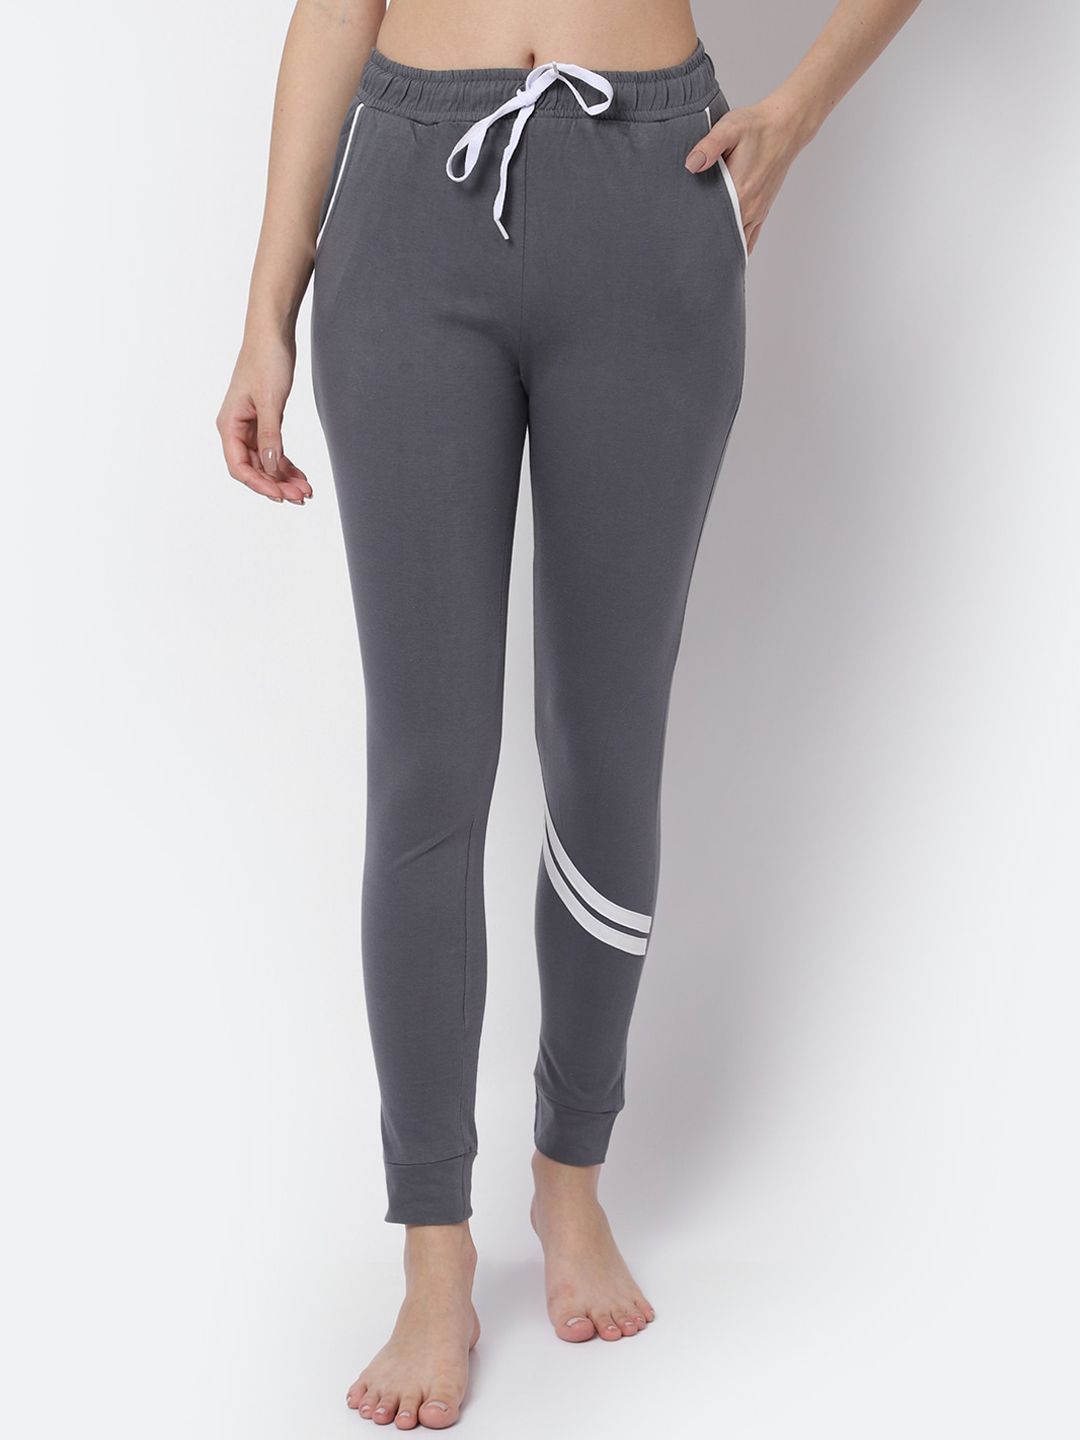 Claura Women Grey Solid Cotton  Slim-Fit Lounge Pants Price in India